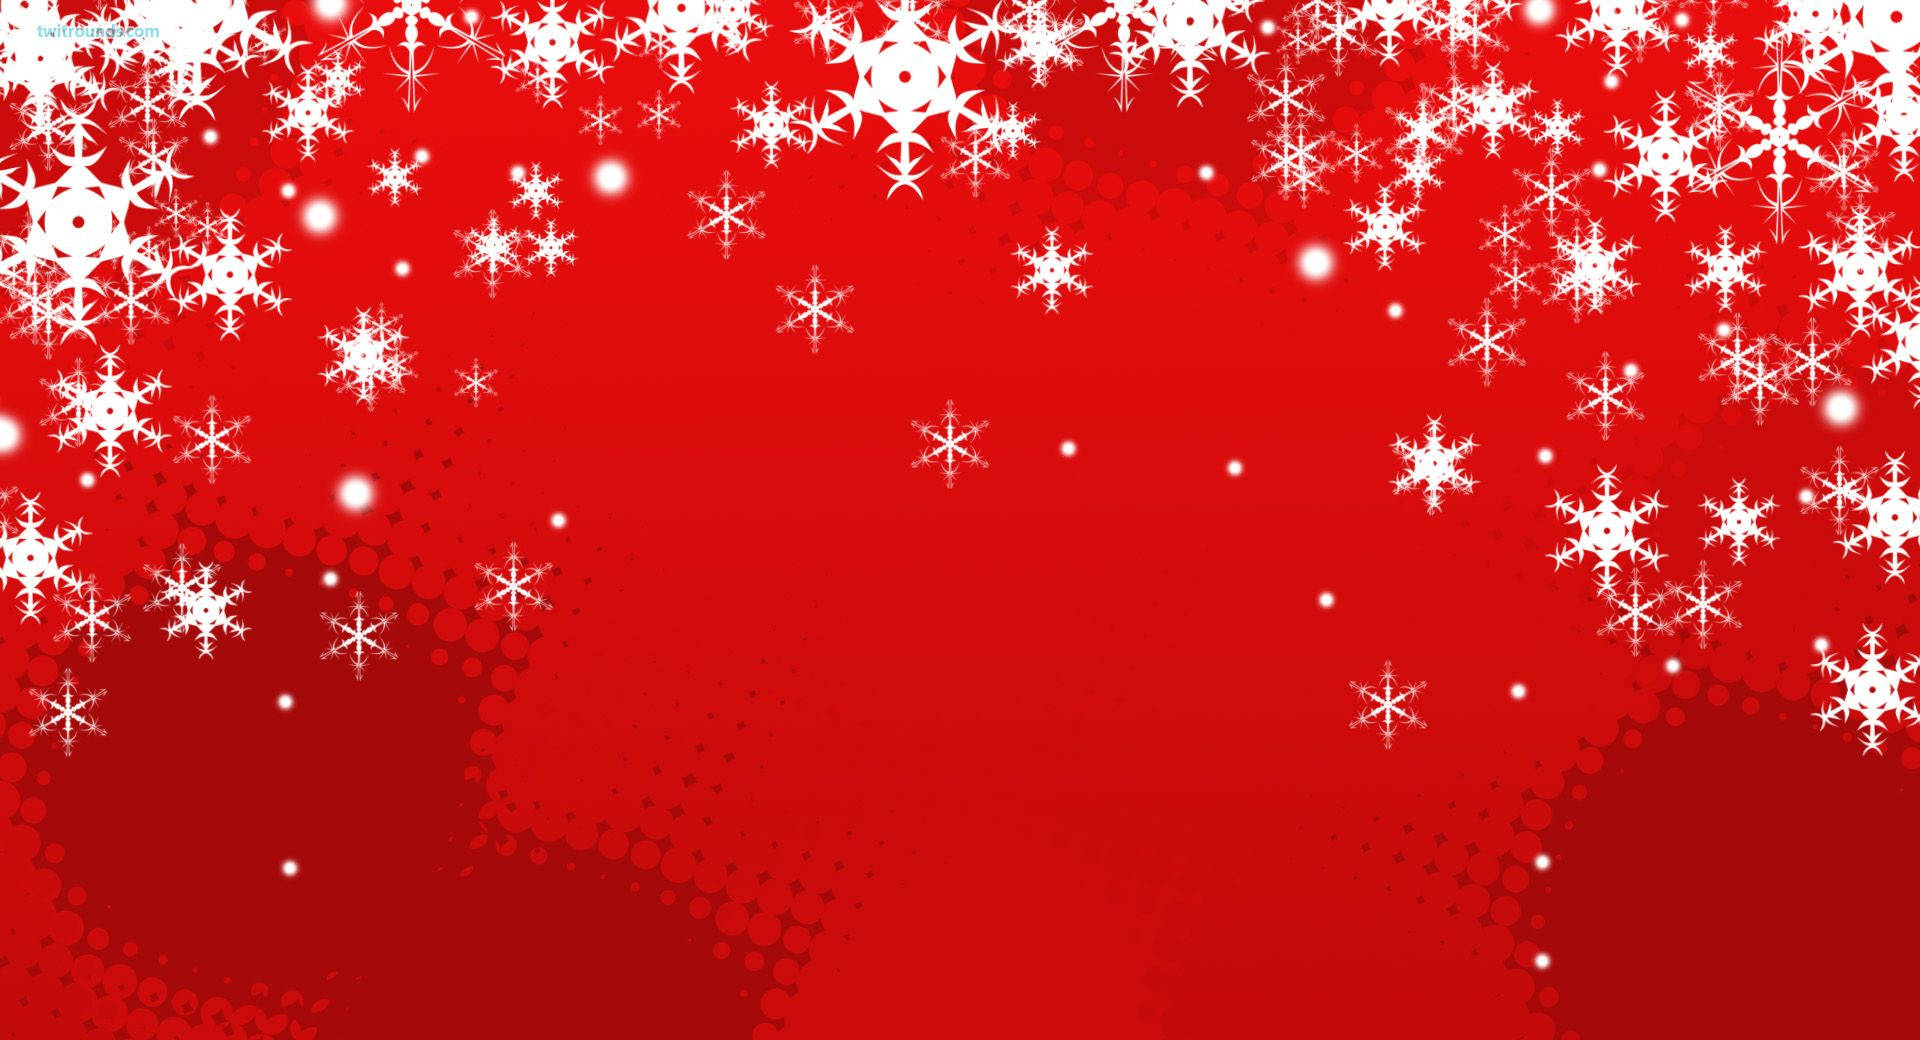 Simple White And Red Christmas Background Wallpaper